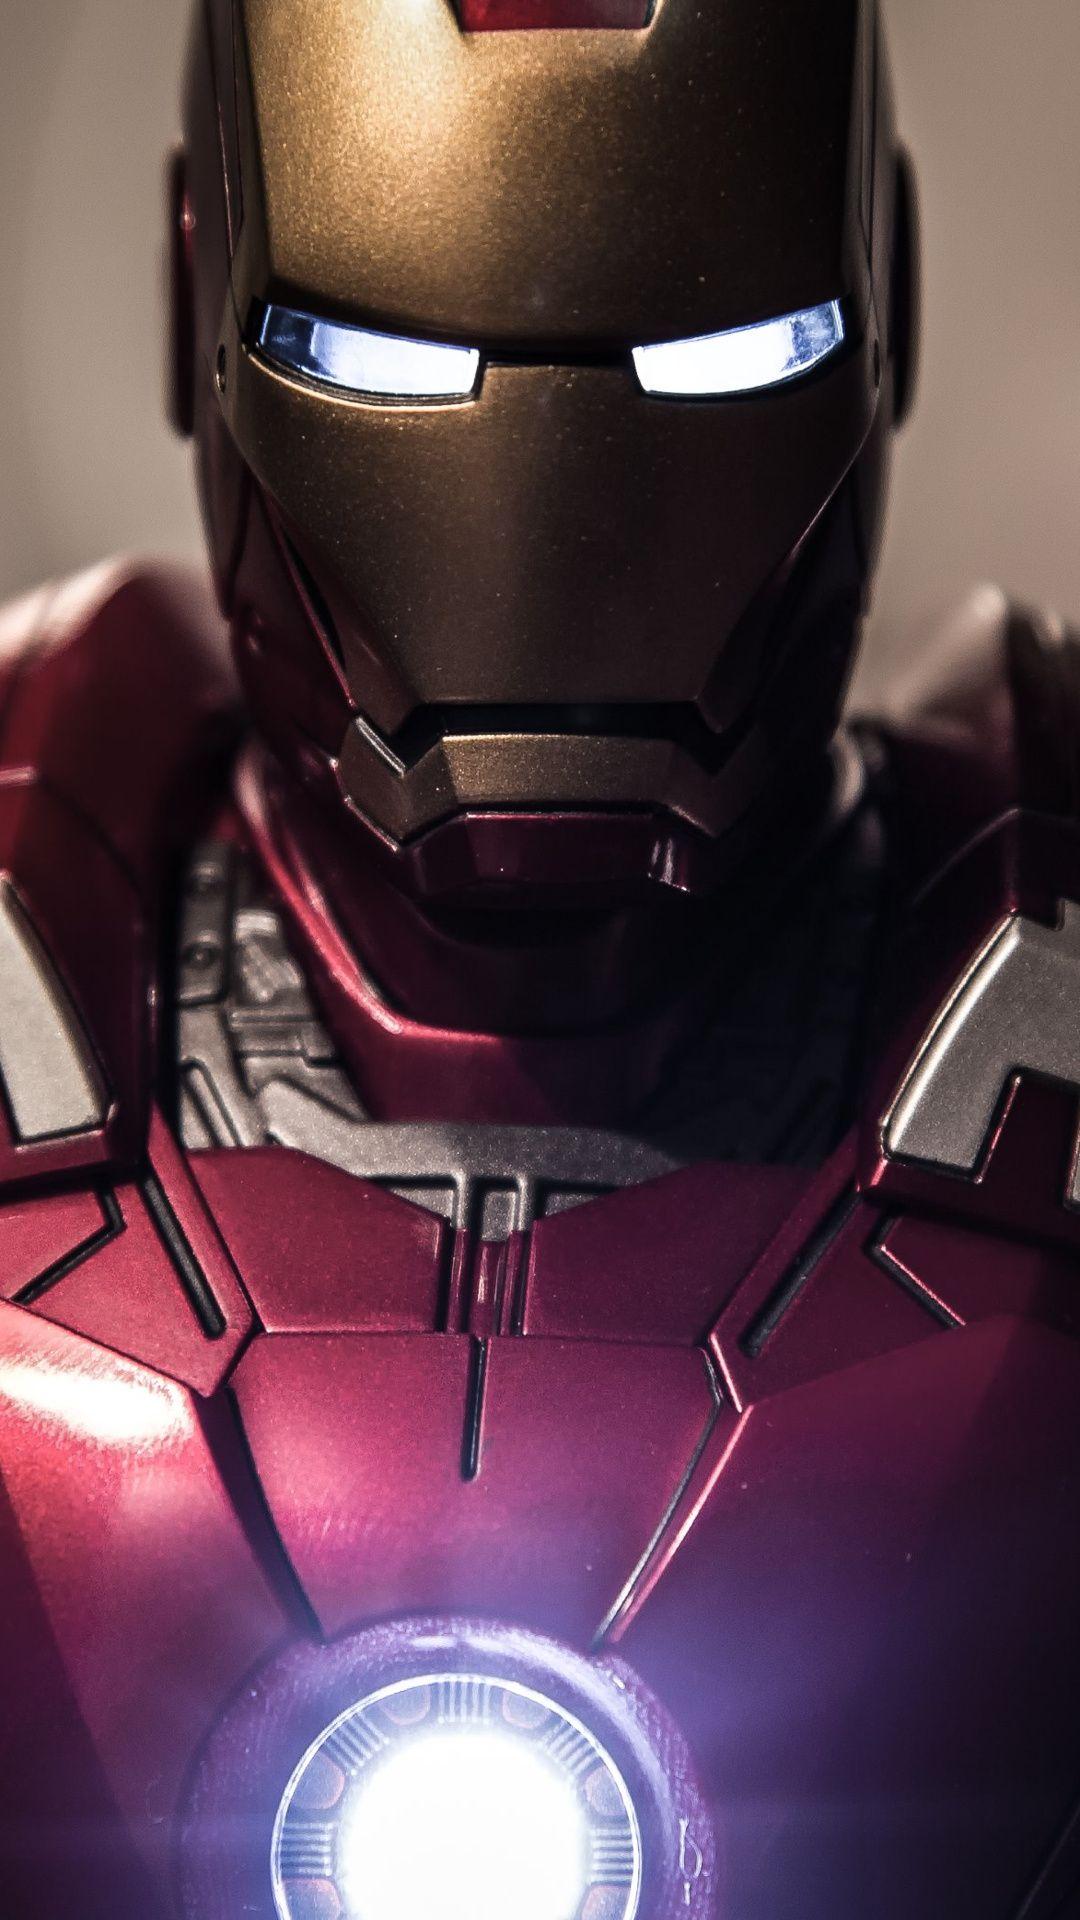 iron man wallpapers for mobile hd